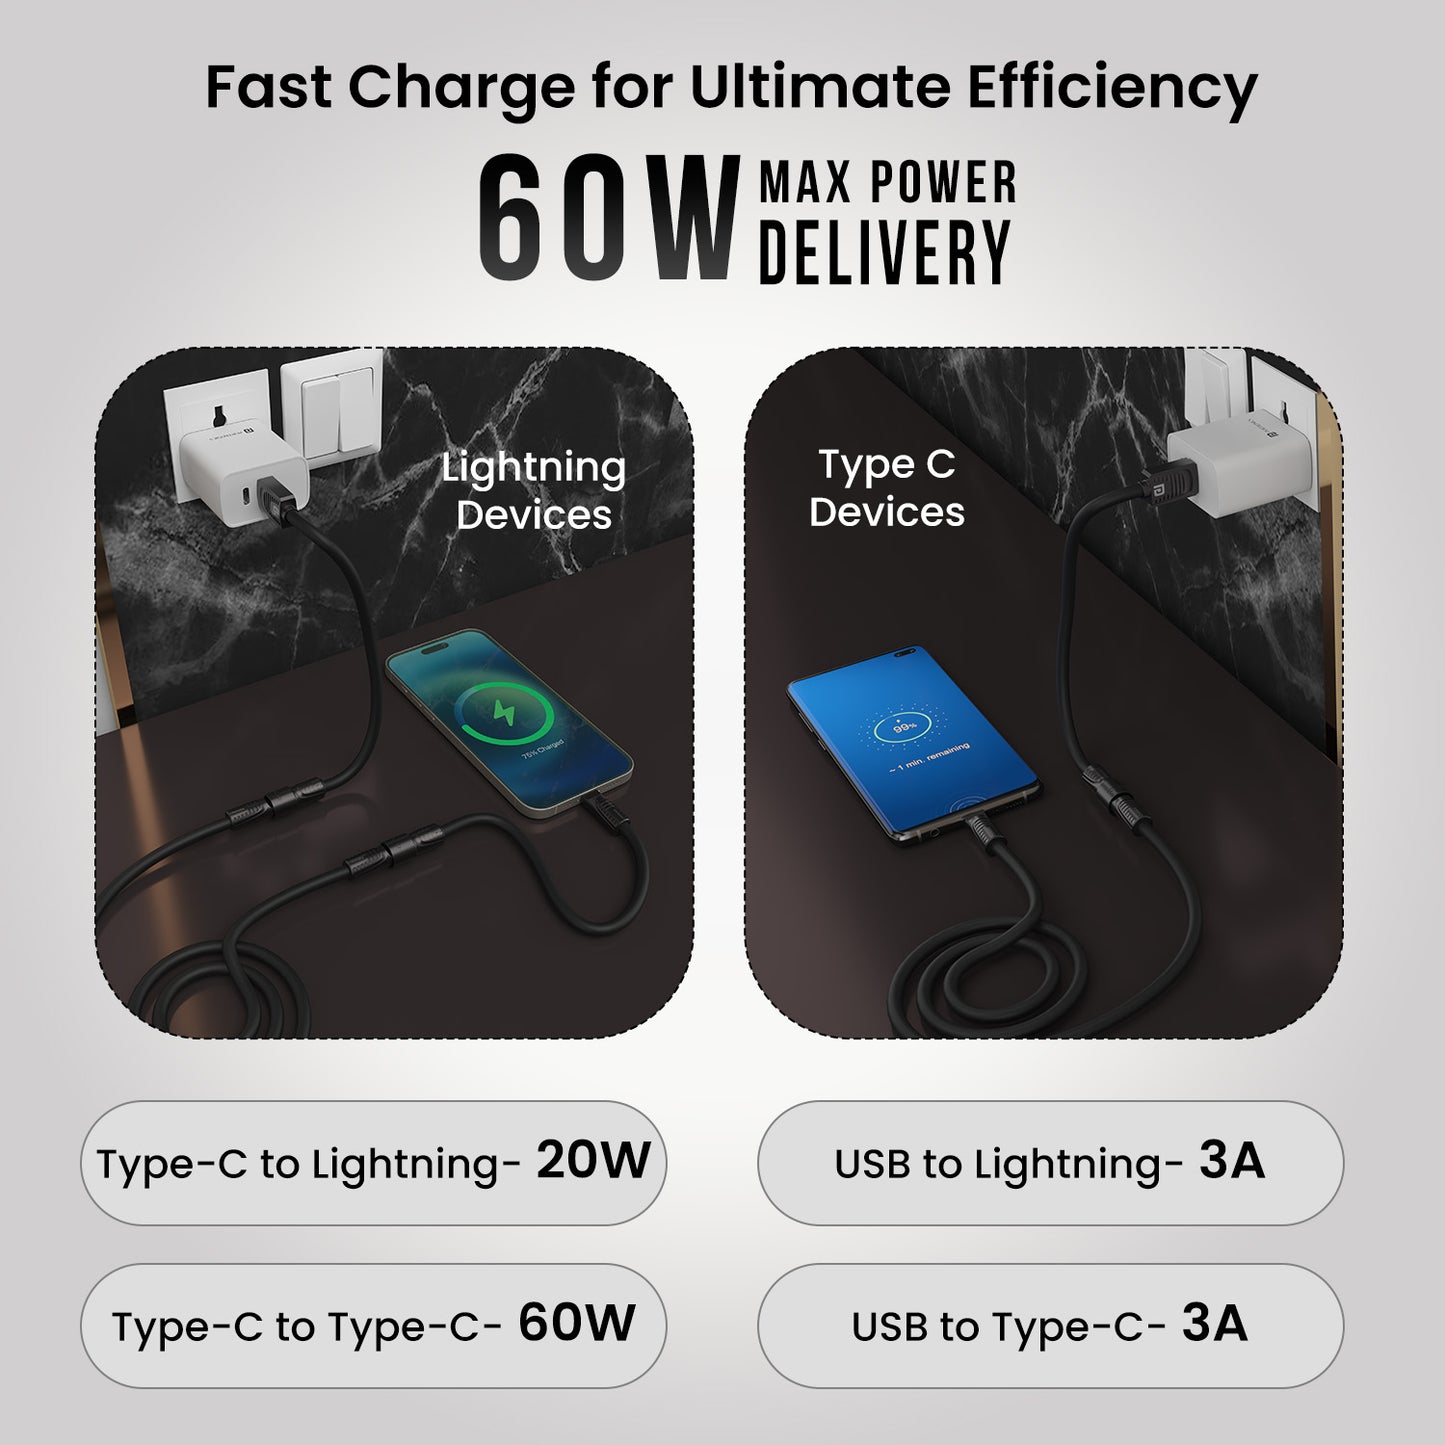 Black Portronics Konnect Tetra 4 in 1 type c fast charging cable| charging cable with 60w max power delivery